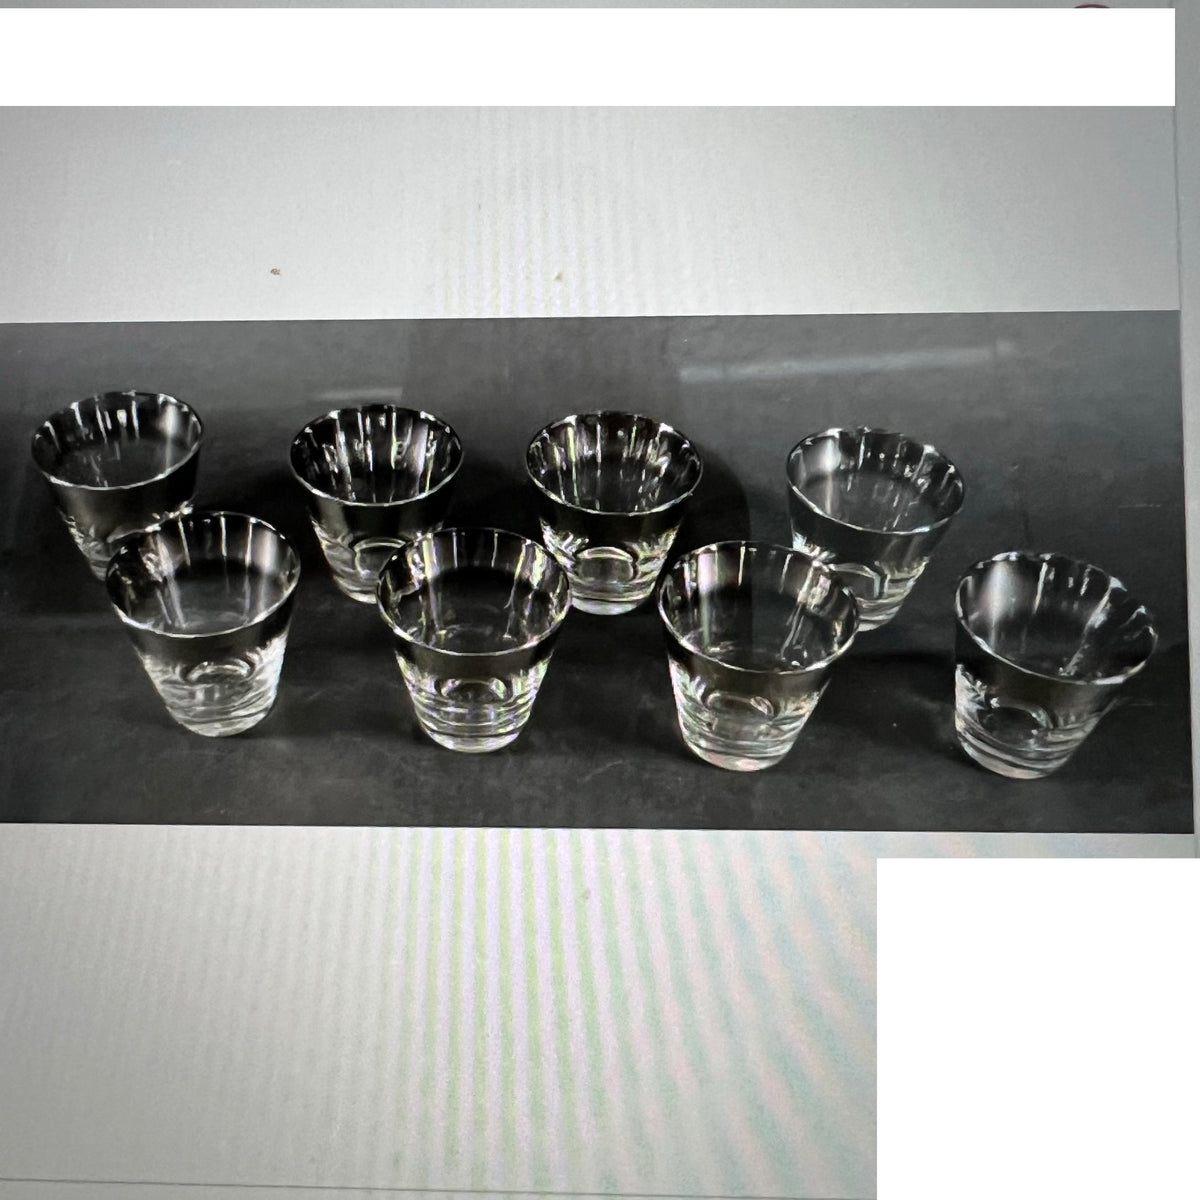 Set of 24 silver "fade rim" Dorothy Thorpe style bar glasses.Set contains: 6 highball glasses' 6 pilsner glasses, 6 rocks glasses,  6 shot glasses,  In excellent condition. This is an excellent, large set of mid-century barware. Would make a great unique wedding gift.  Chicago area.  Pick-up available.